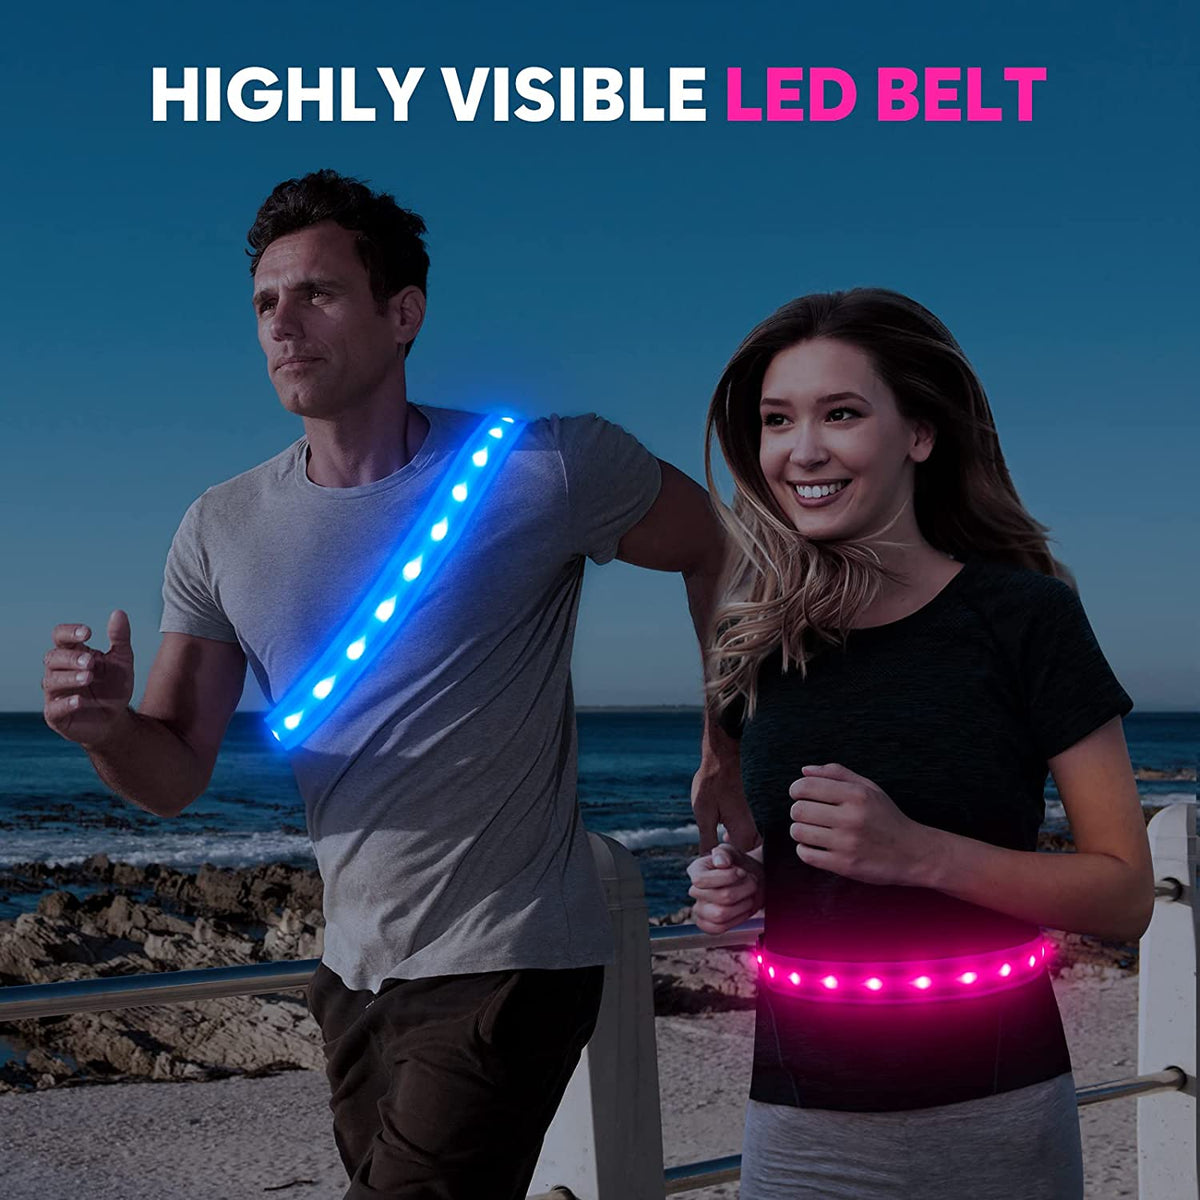  BSEEN LED Running Waist Belt - USB Rechargeable Reflective  Glowing LED Waistband, Flashing Safety Light Belt for Runners, Joggers,  Walkers, Pet Owners, Cyclists (Blue) : Sports & Outdoors